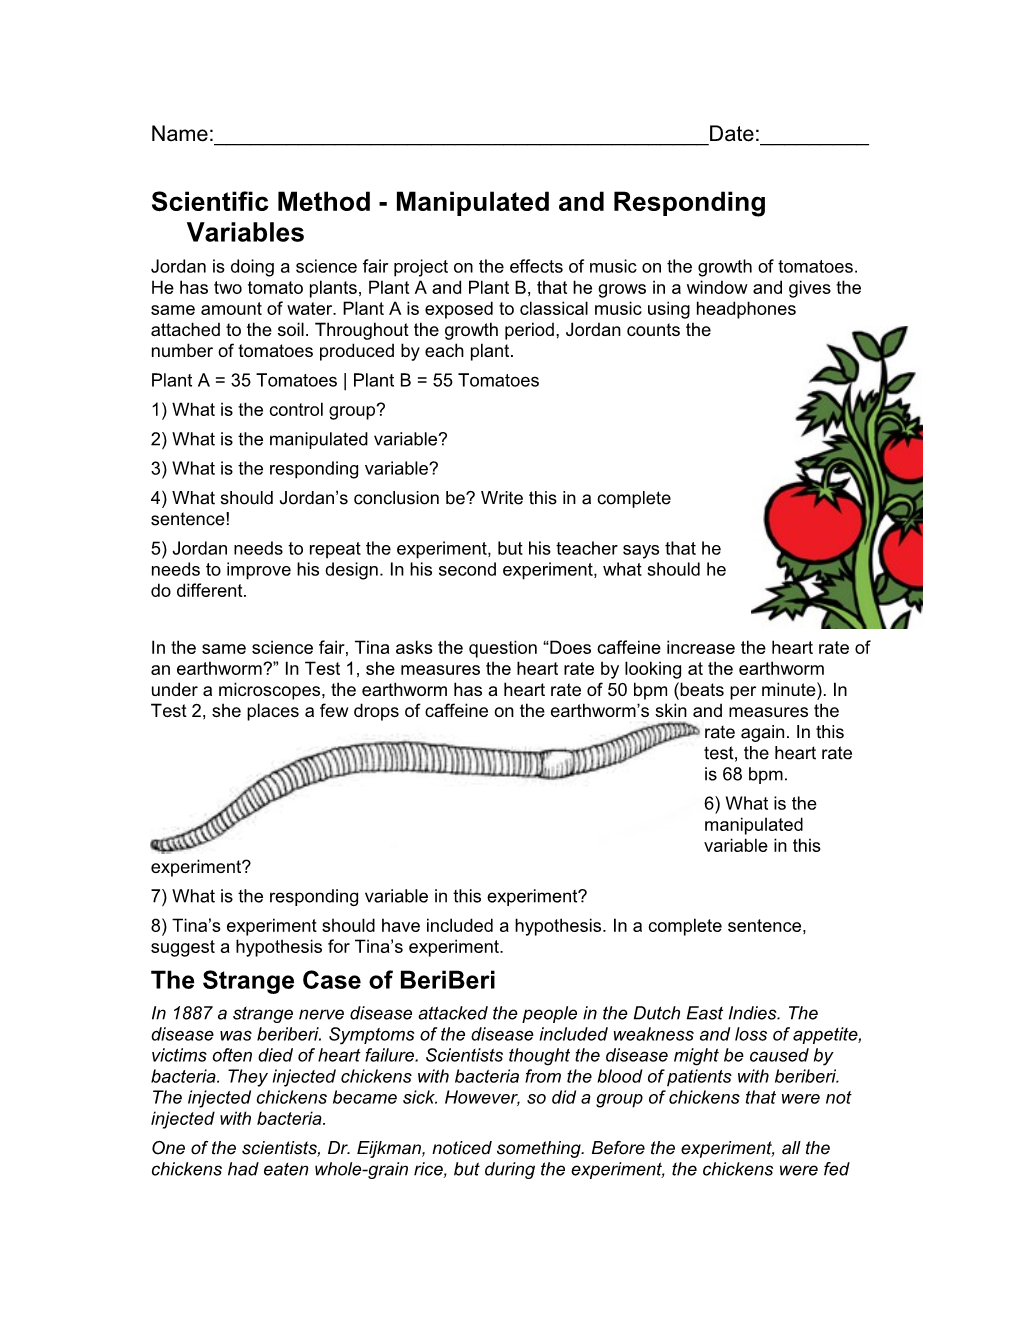 Scientific Method - Manipulated and Responding Variables